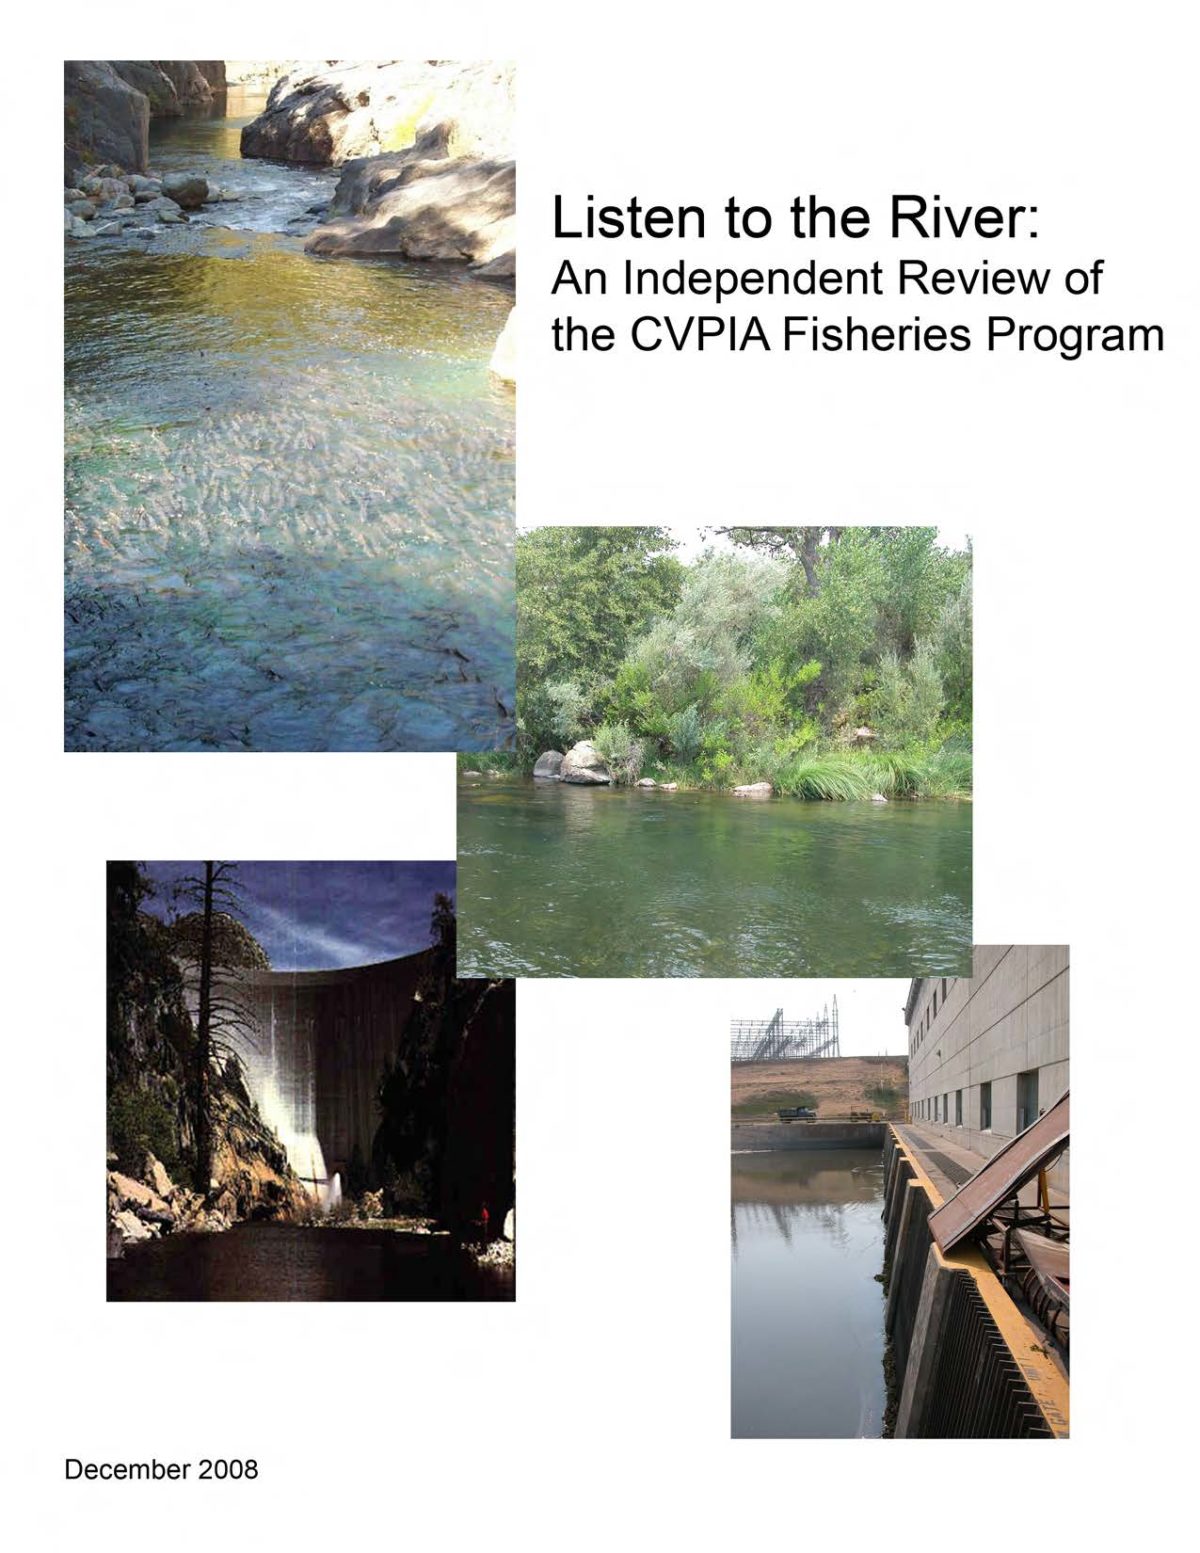 Listen to the River: An Independent Review of the CVPIA Fisheries Program